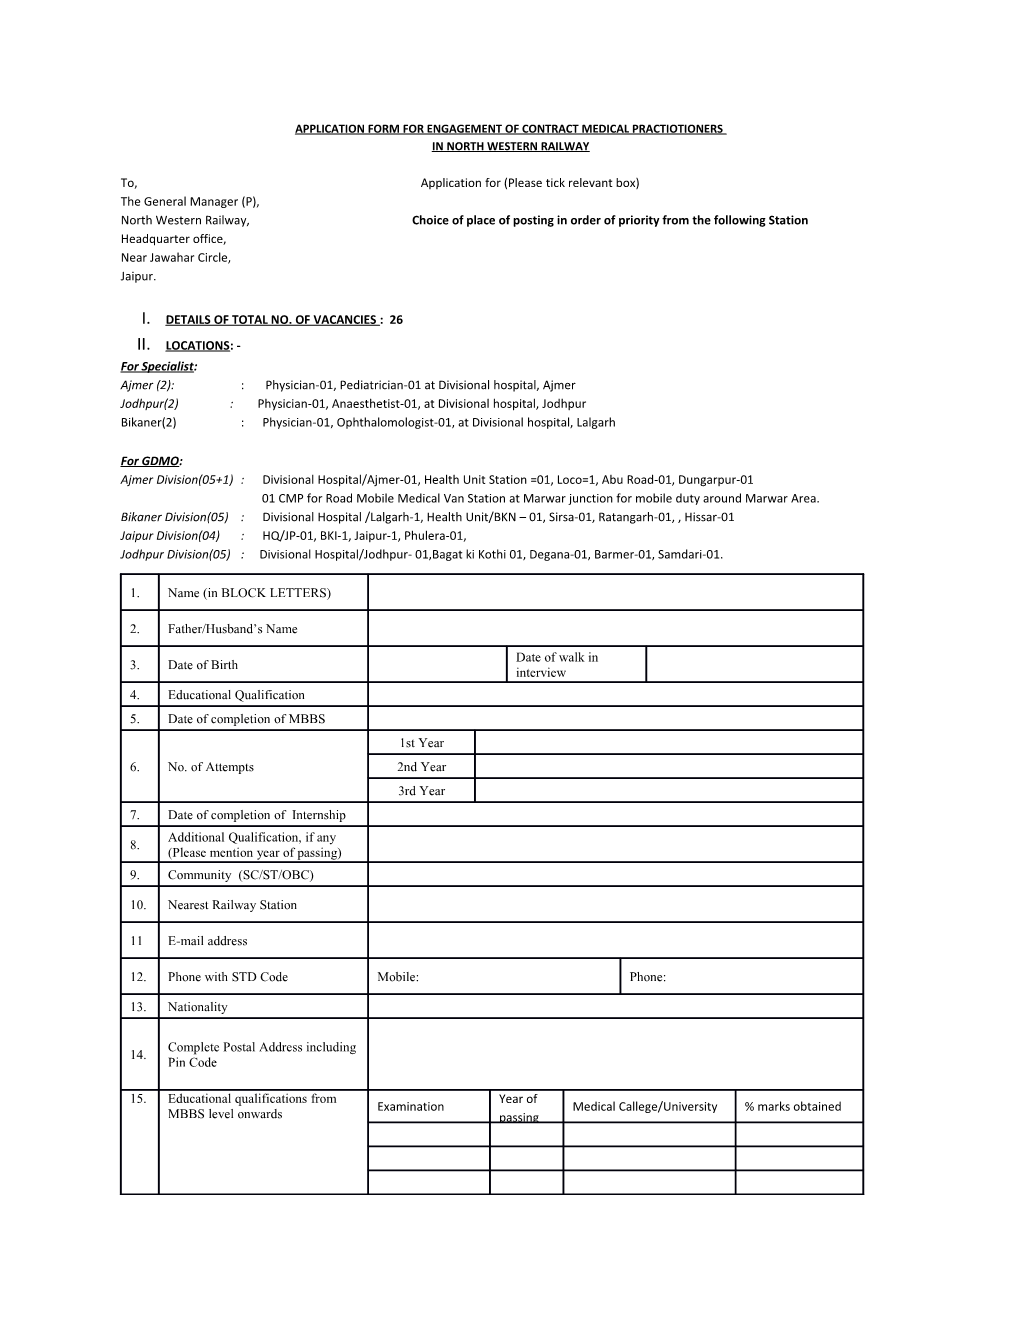 Application Form for Engagement of Contract Medical Practiotioners